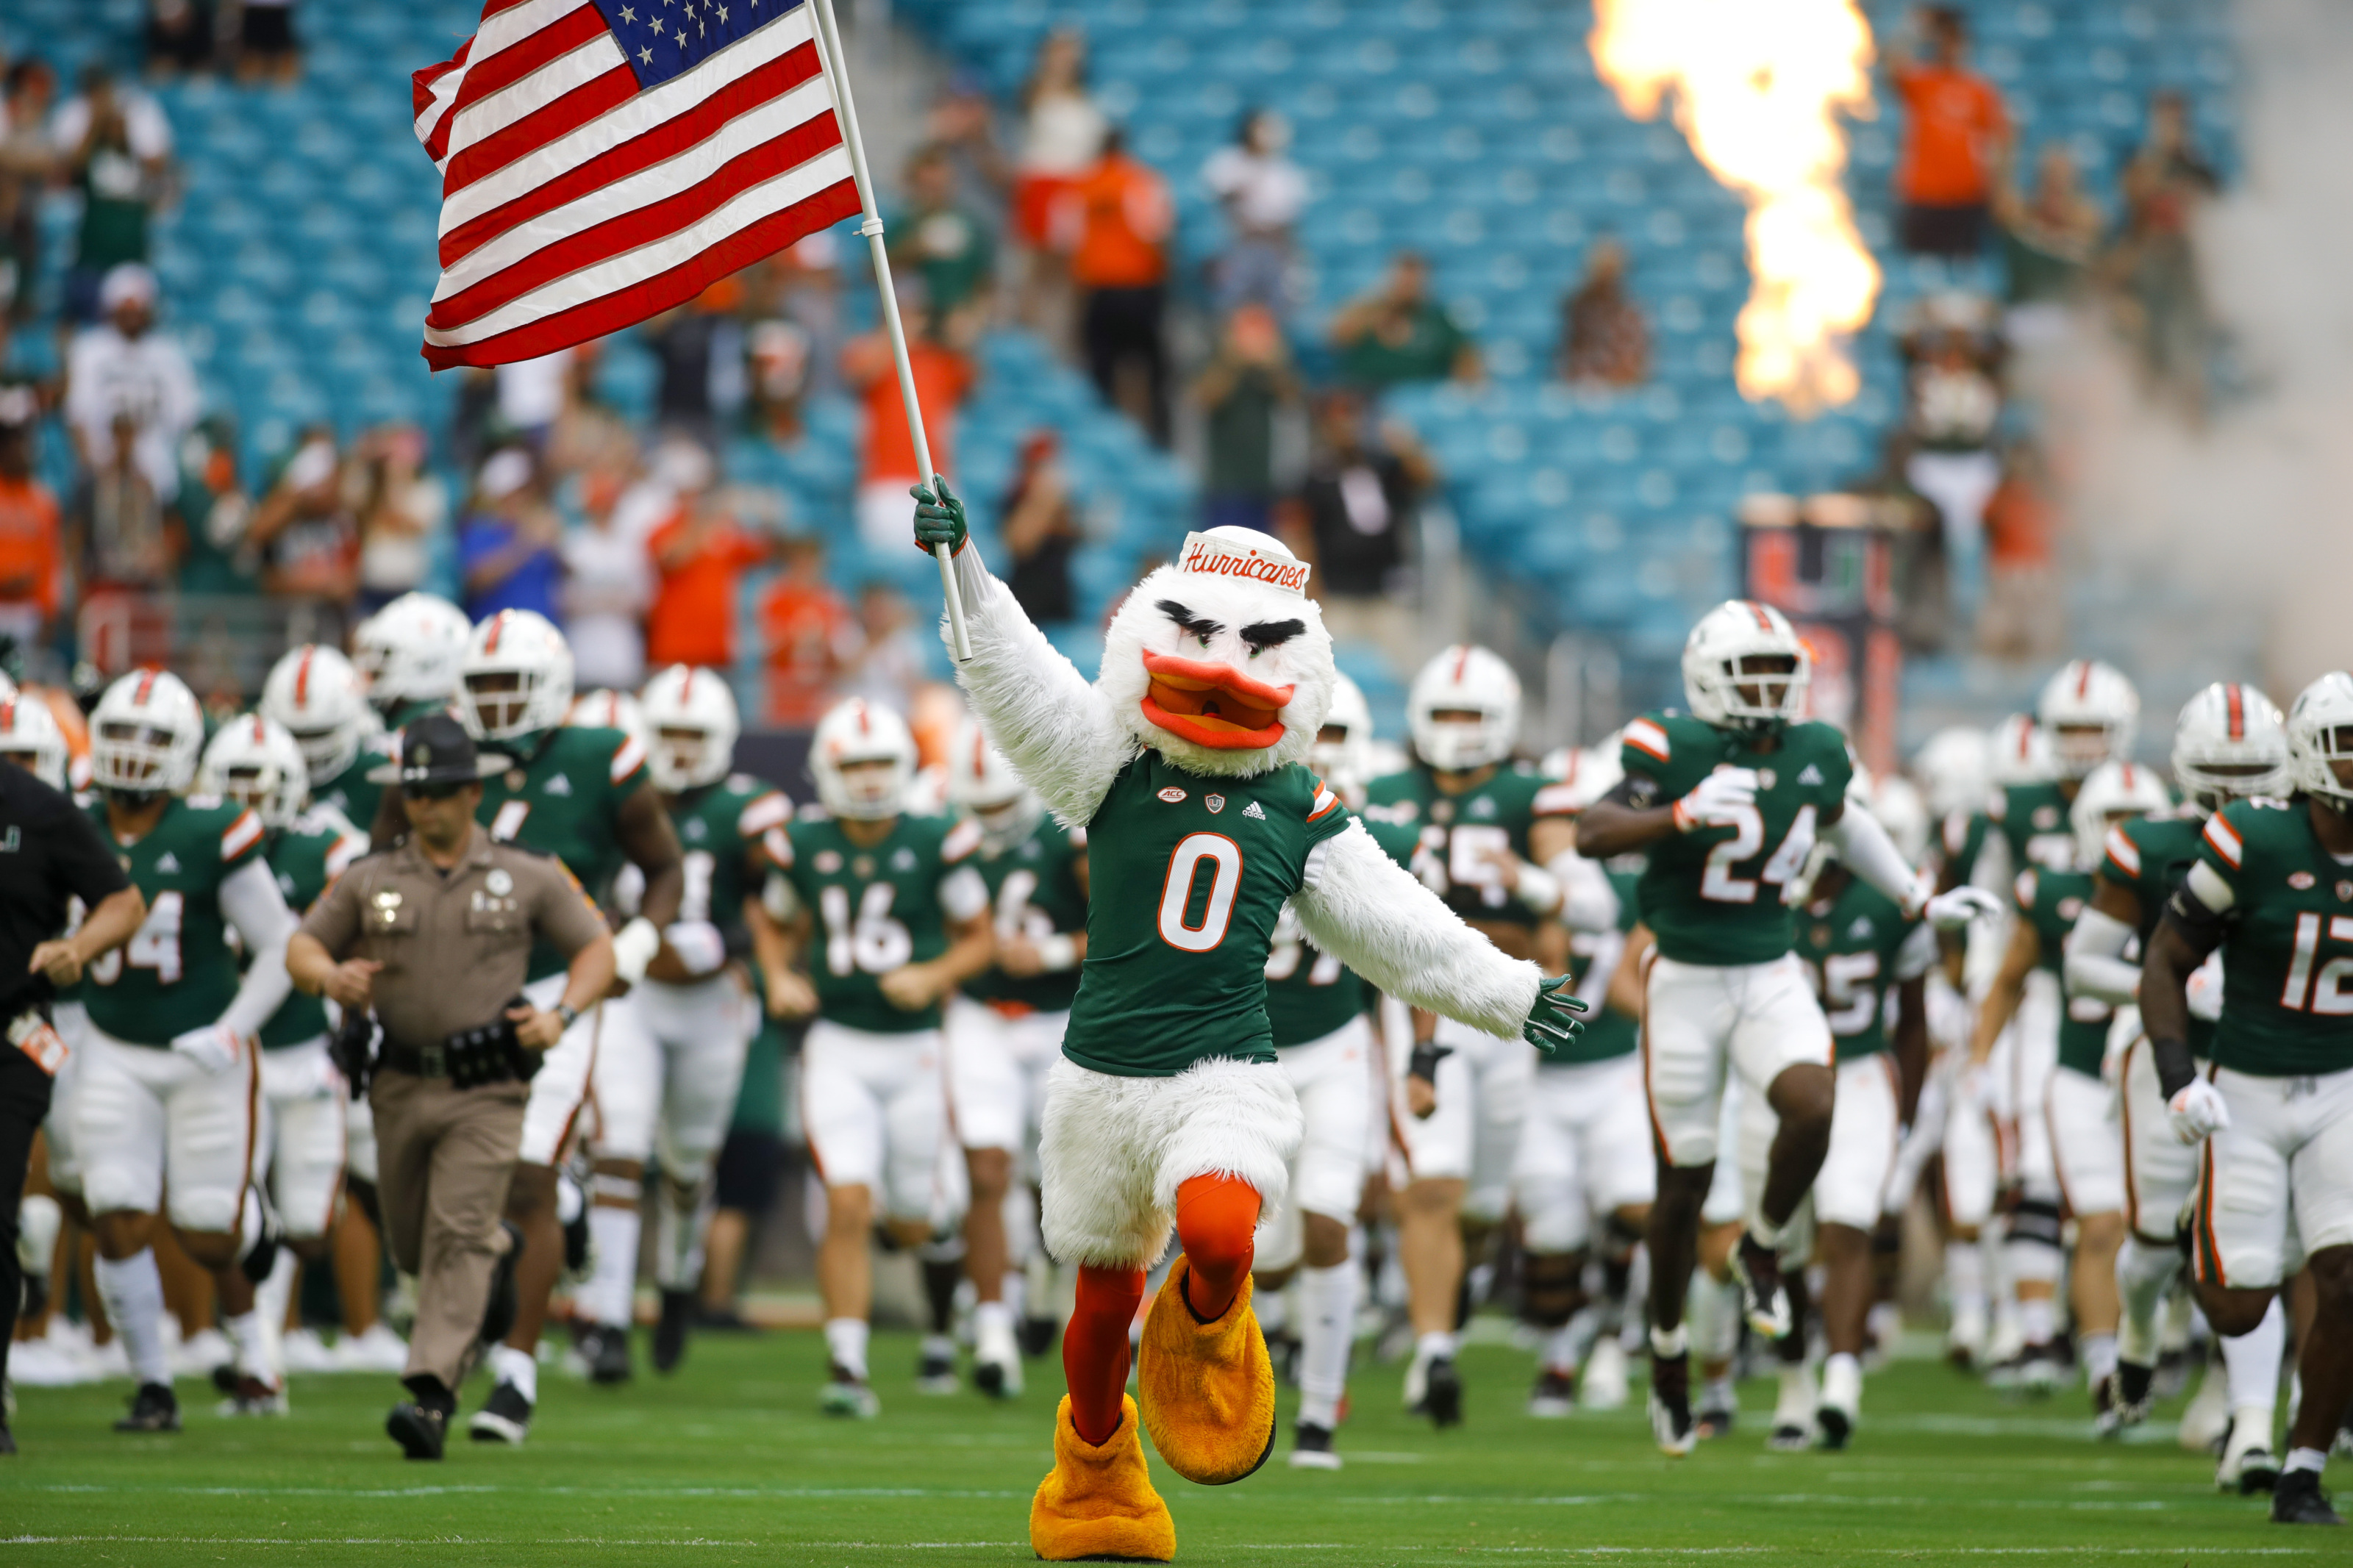 ACC waiting on Miami Hurricanes; College football notebook